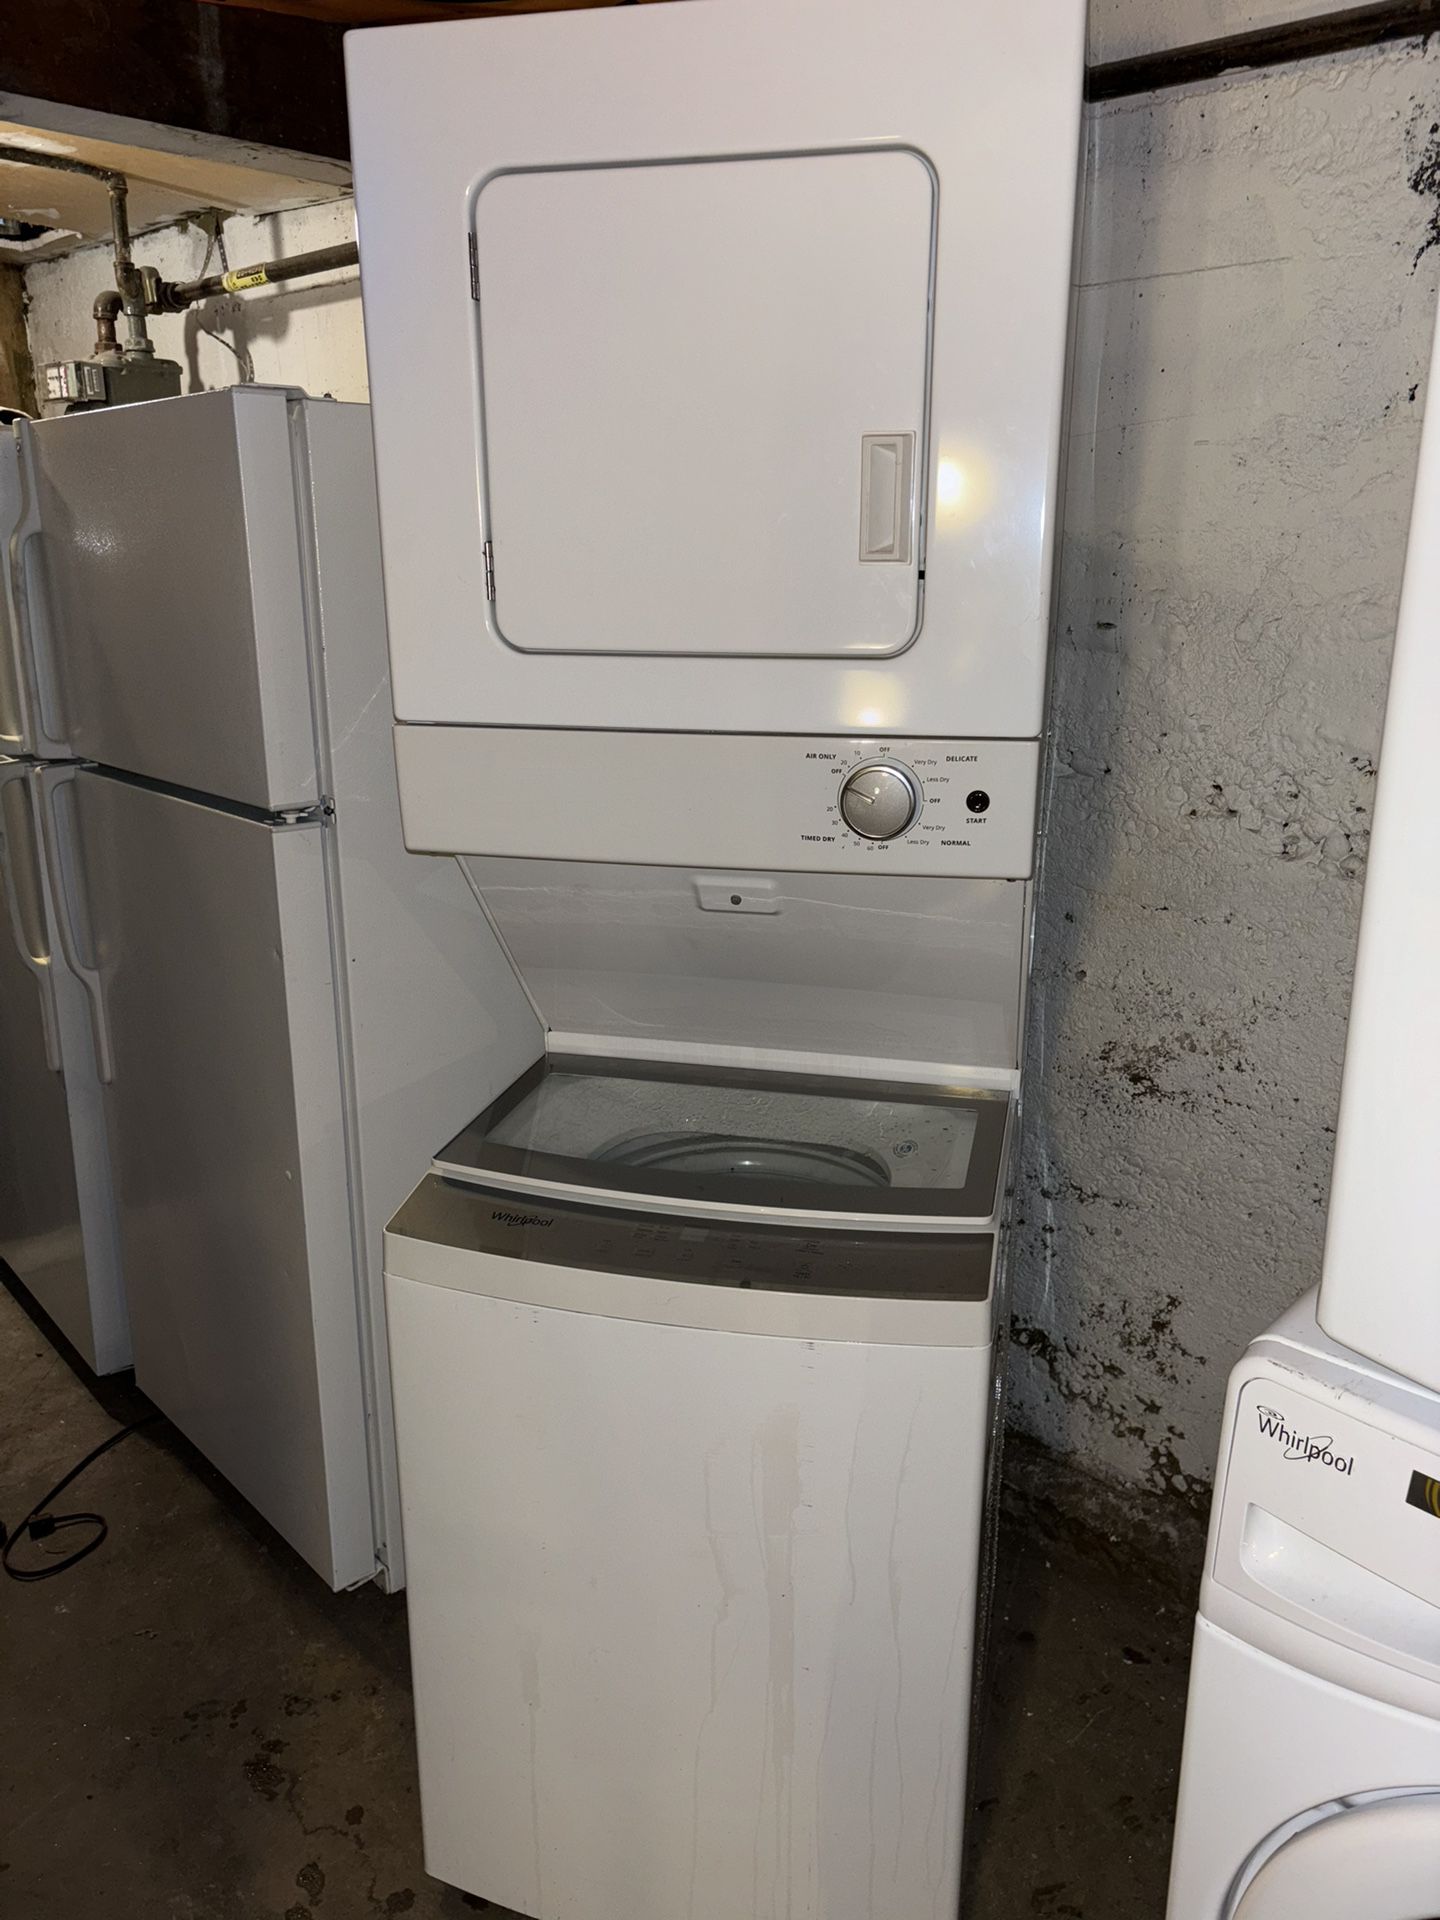 Whirlpool Washer And Dryer Set Good Condition 